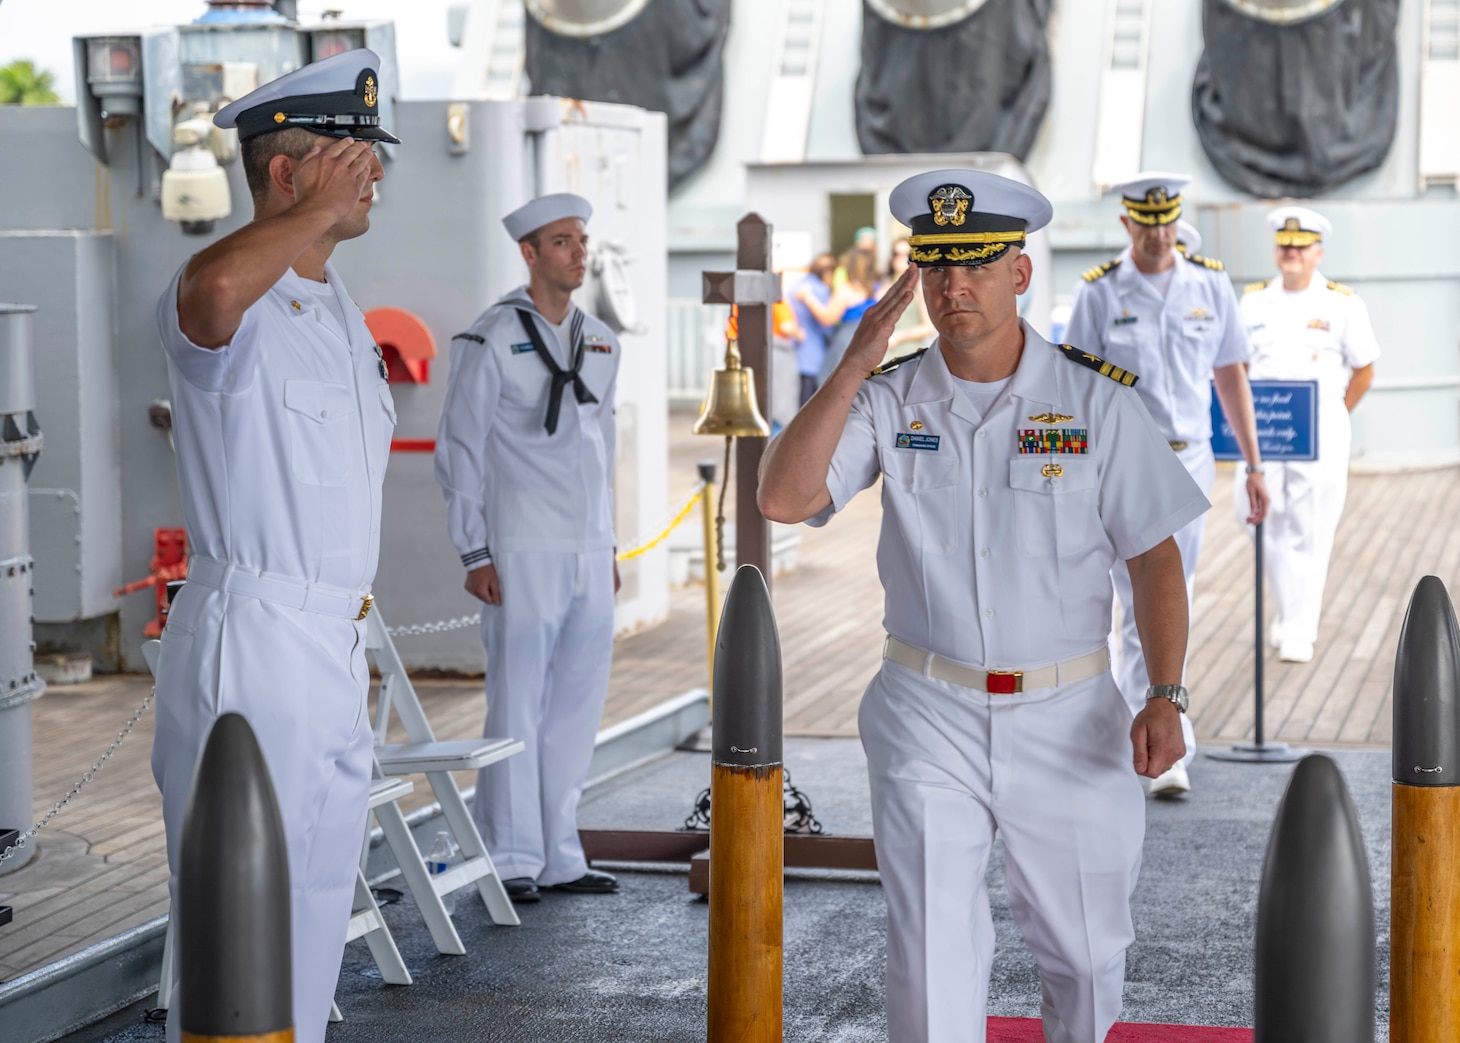 PEARL HARBOR (Nov. 21, 2023) — Cmdr. Daniel Jones, incoming commanding officer of the Virginia-class fast-attack submarine USS Hawaii (SSN 776), arrives at the change of command ceremony for the Hawaii, which was held on the fantail of the Battleship Missouri Memorial, Nov. 21, 2023, in Pearl Harbor. Hawaii performs a full spectrum of operations, including anti-submarine and anti-surface warfare. (U.S. Navy photo by Mass Communication Specialist 1st Class Scott Barnes)